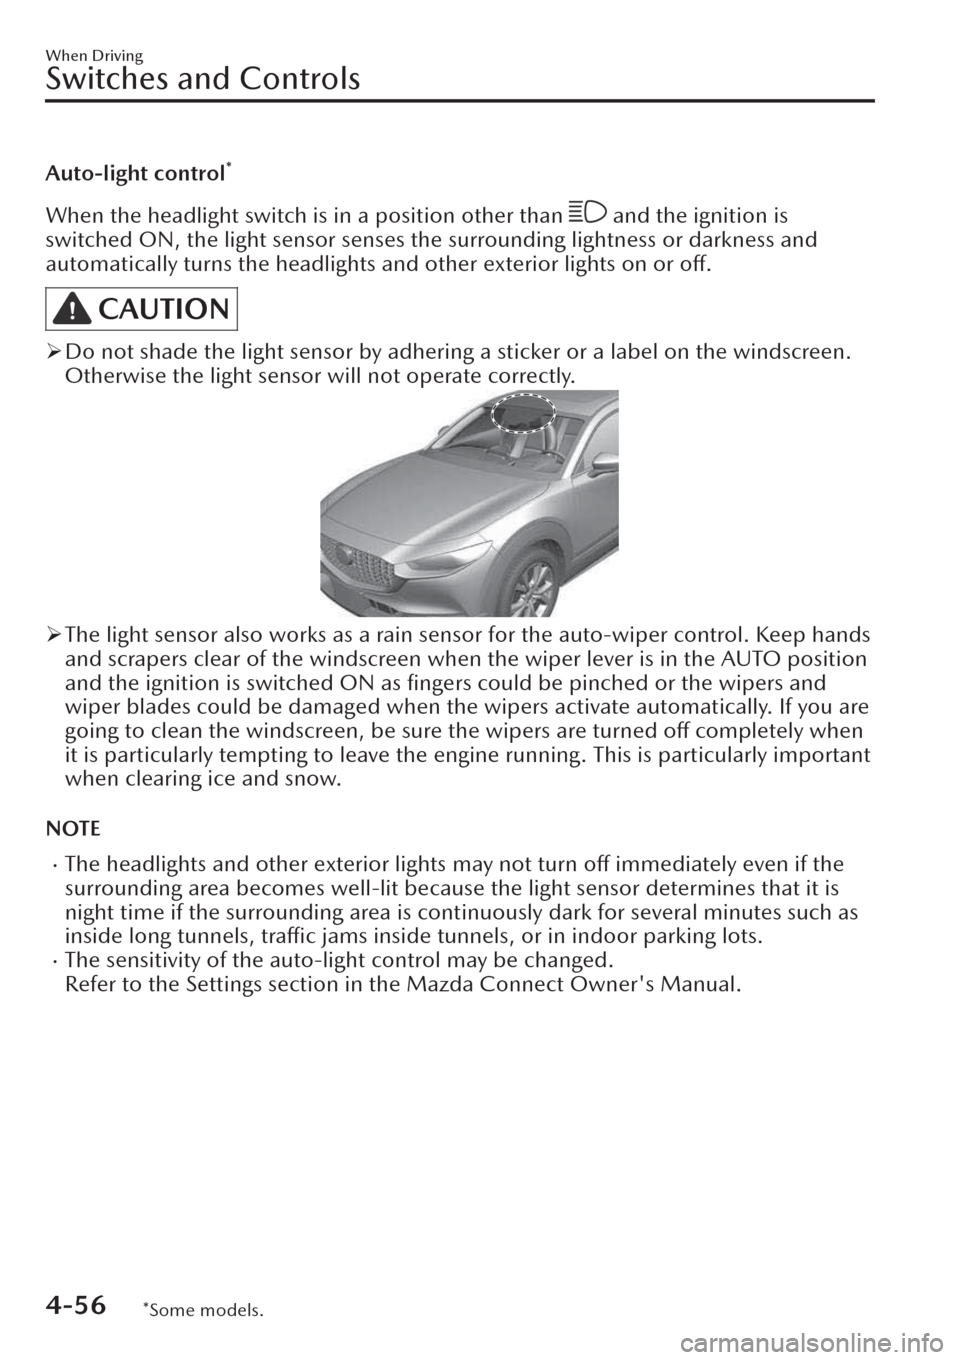 MAZDA MODEL CX-30 2019   (in English) Manual PDF Auto-light control*
When the headlight switch is in a position other than  and the ignition is
switched ON, the light sensor senses the surrounding lightness or darkness and
automatically turns the he